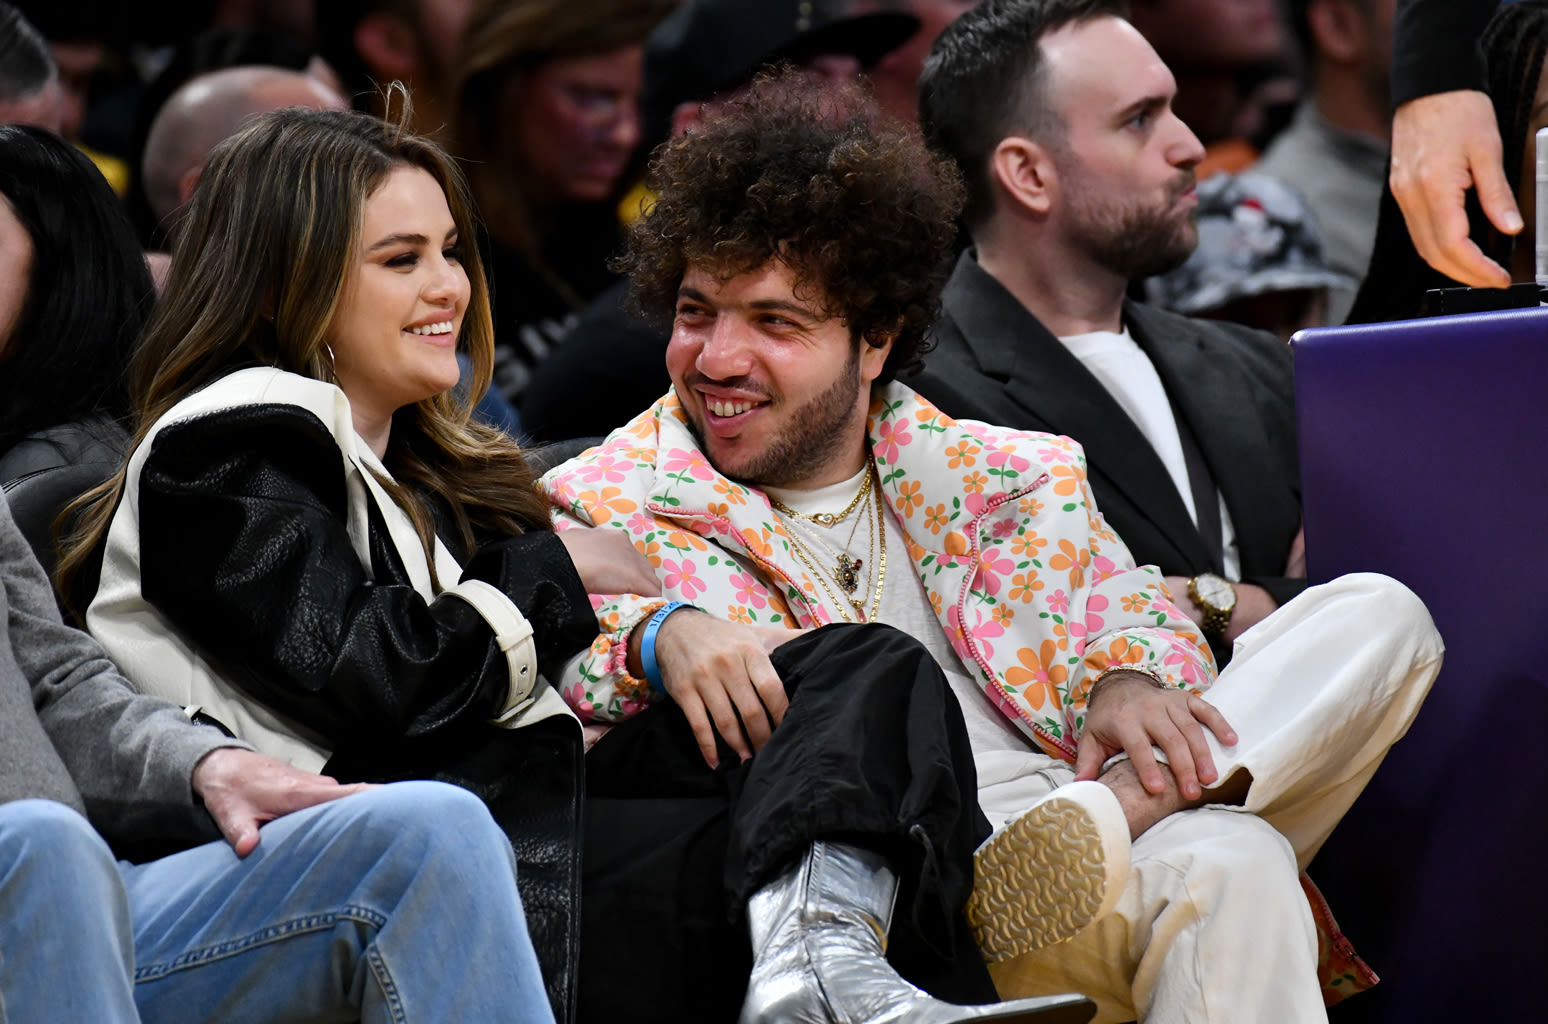 Benny Blanco Can’t Believe He’s Dating Selena Gomez Either: ‘How Did This Happen?’